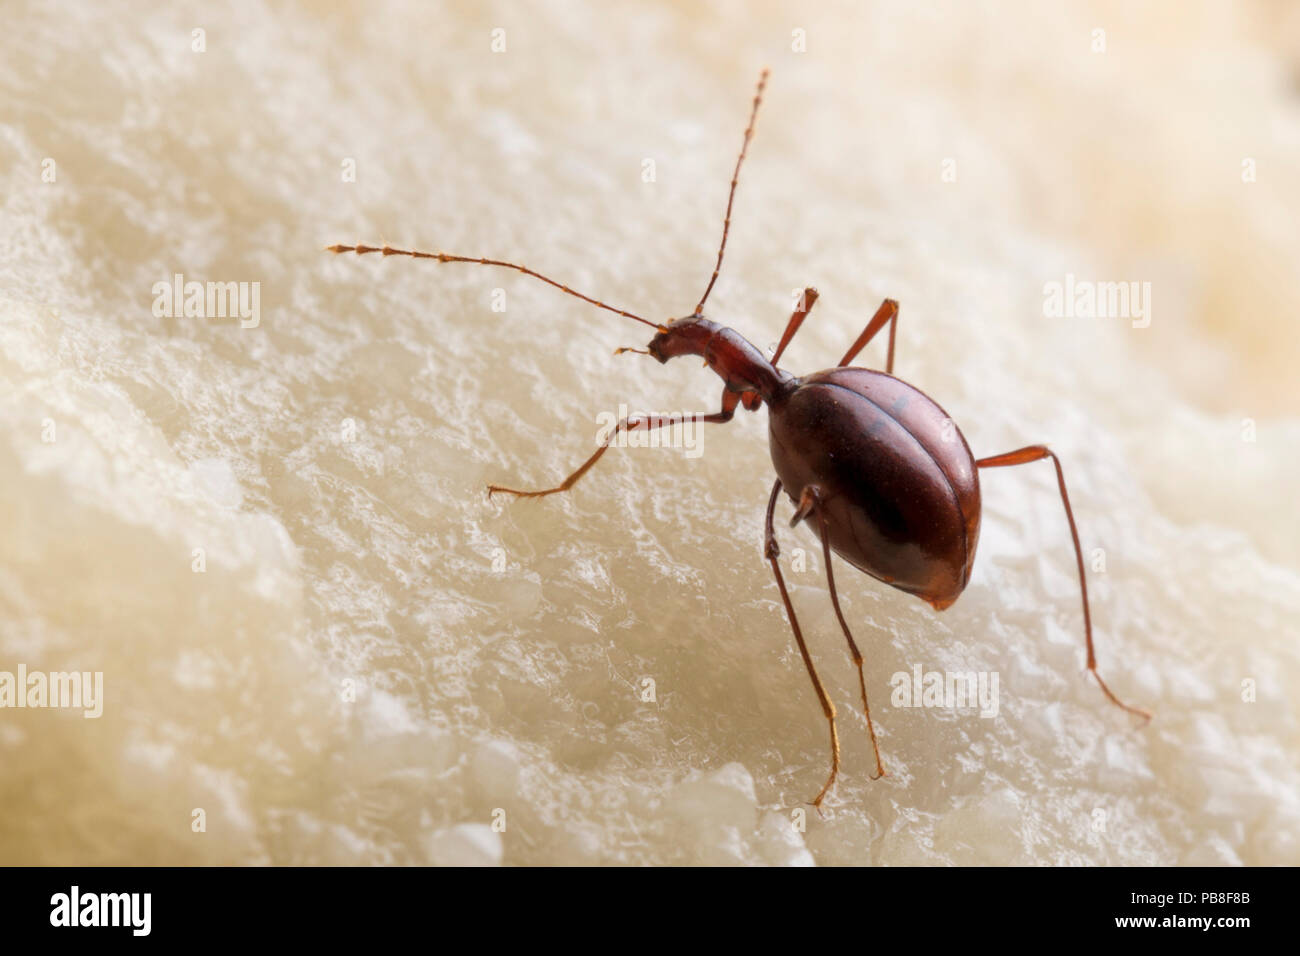 Cave beetle (Leptodirus hochenwartii)  a true troglobite (living only in caves). Endemic to karstic caves of Dinaric Alps, Slovenia, April. Stock Photo